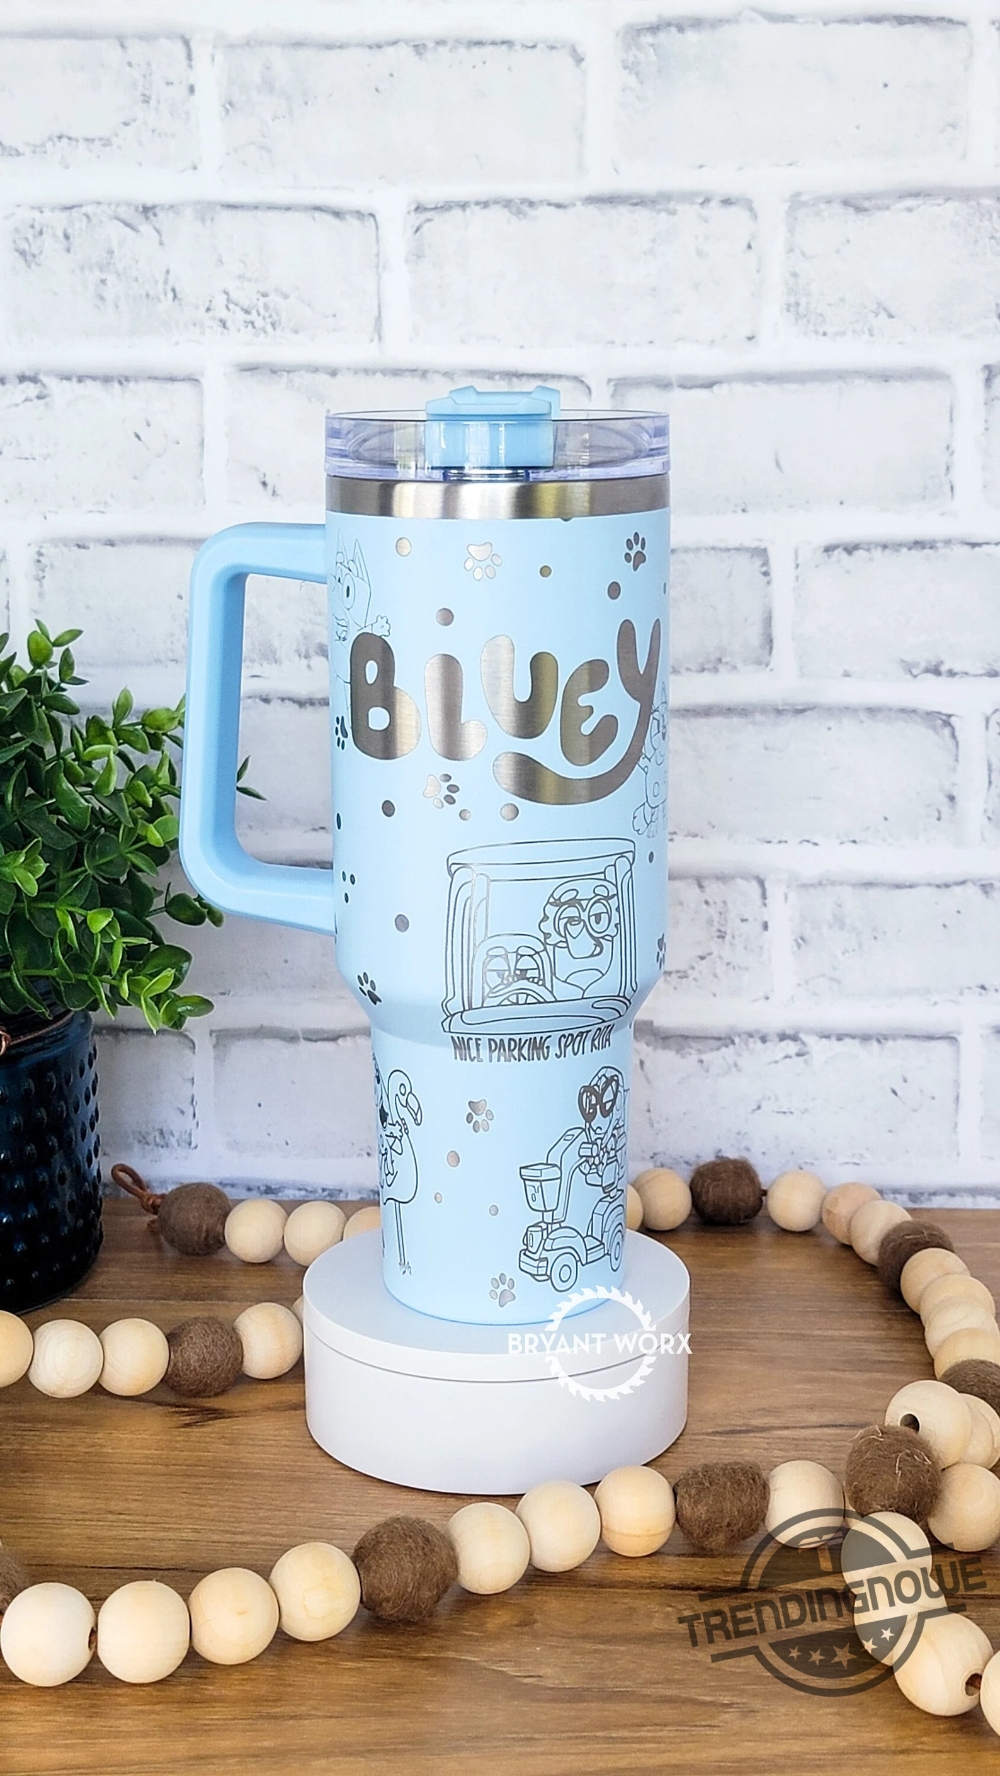 Cute Dog Stanley Cup Grannies Heeler Blue Dog Muffin Stanley Tumbler Here Come The Grannies Tumbler Gift For Family Birthday Dad Mom